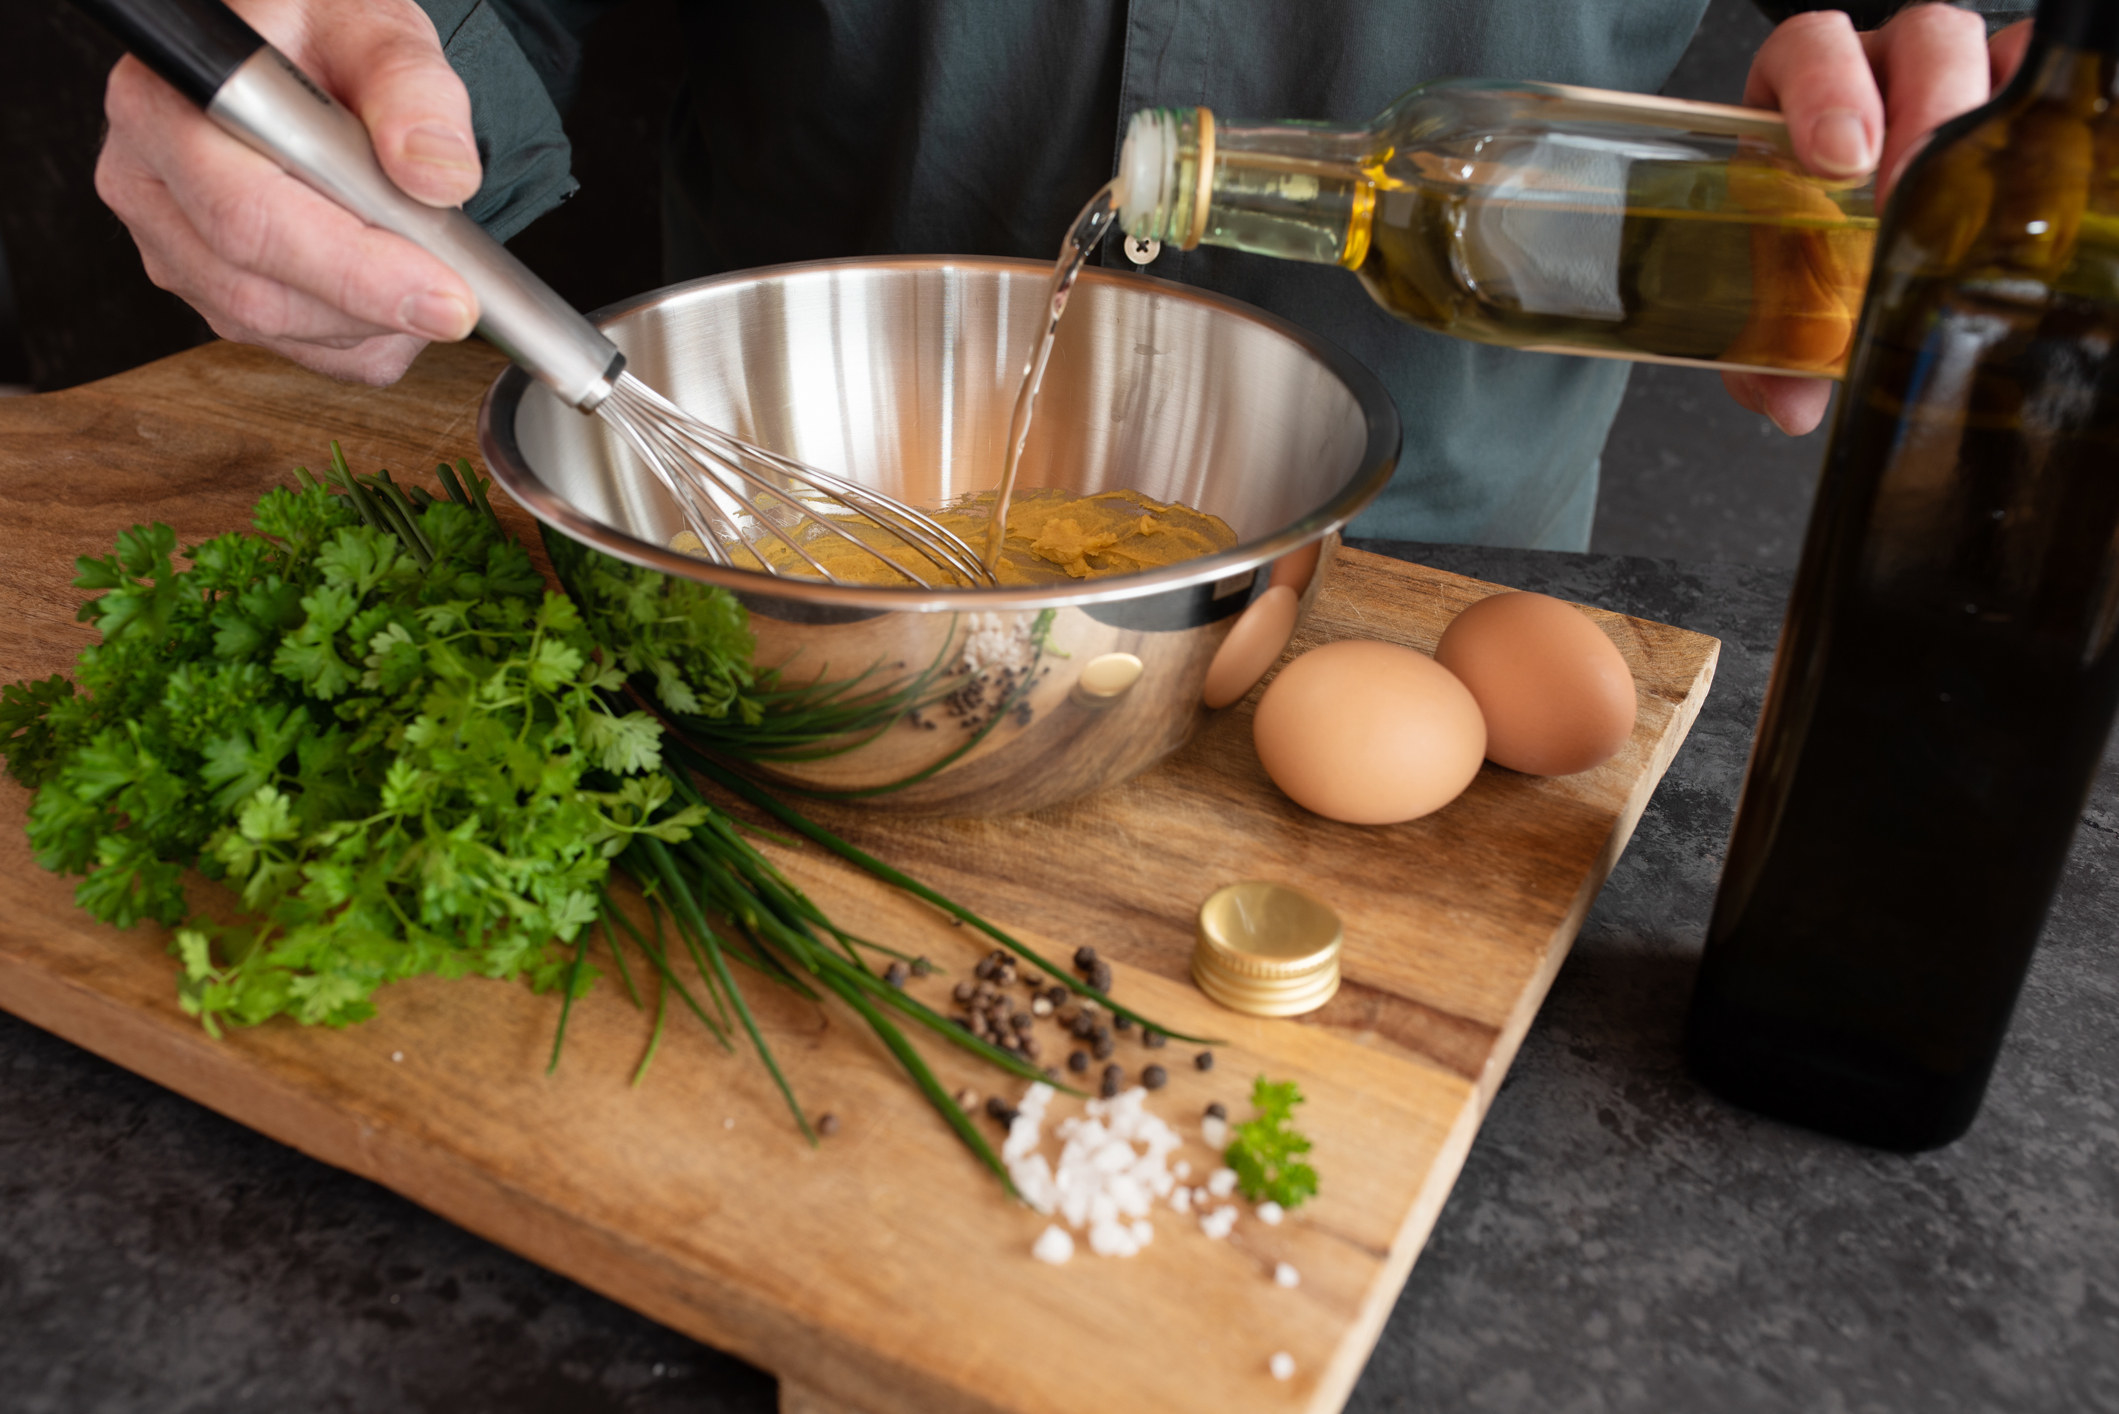 Preparing a sauce with vinegar and herbs.